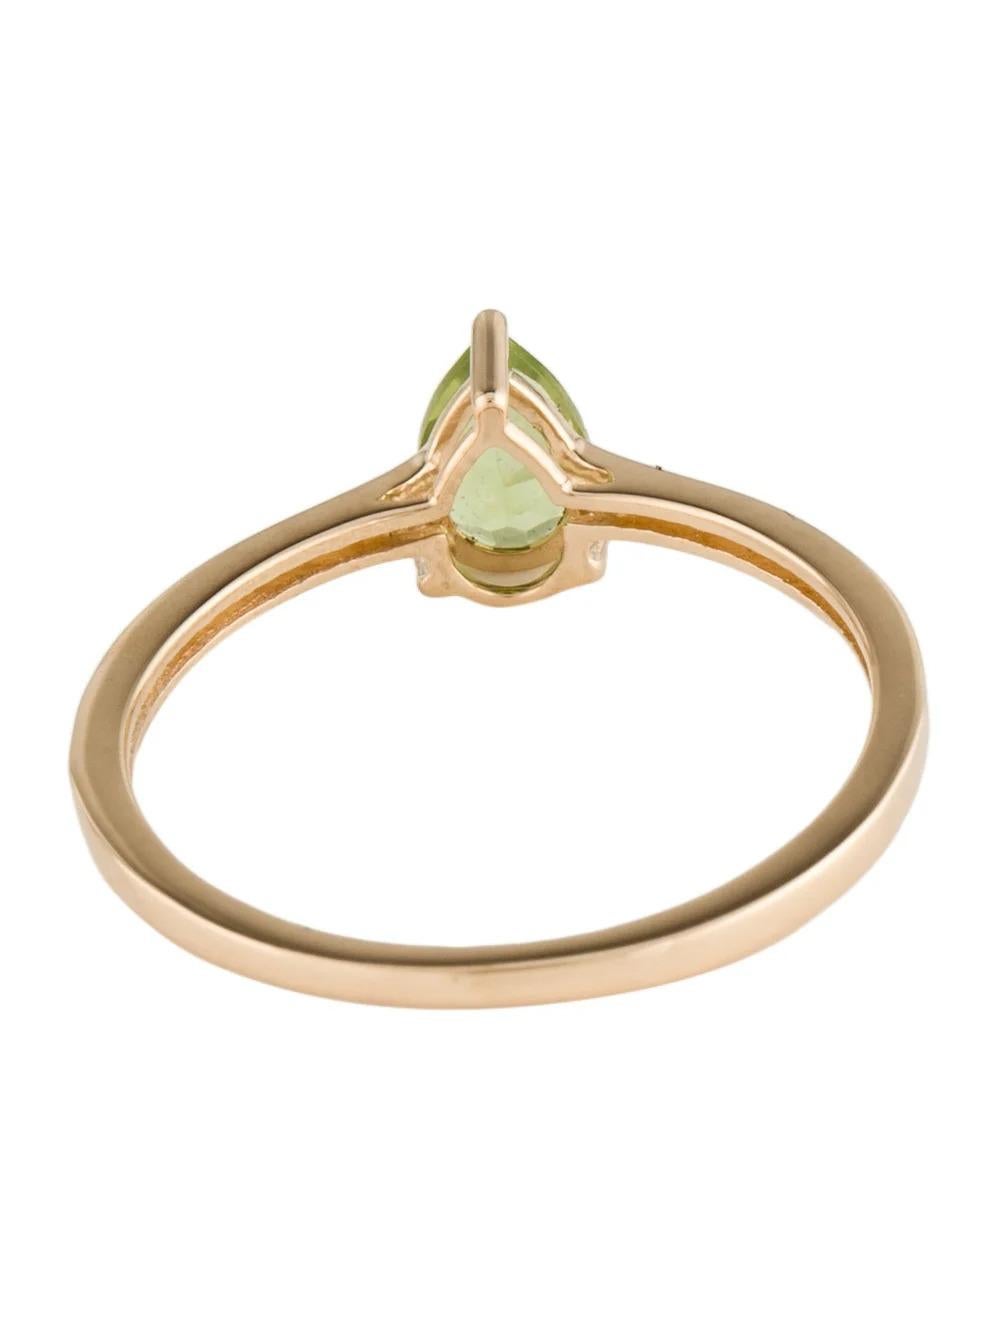 14K Peridot Cocktail Ring, Size 6.75: Elegant Design, Vibrant Color, Fine Gold In New Condition For Sale In Holtsville, NY